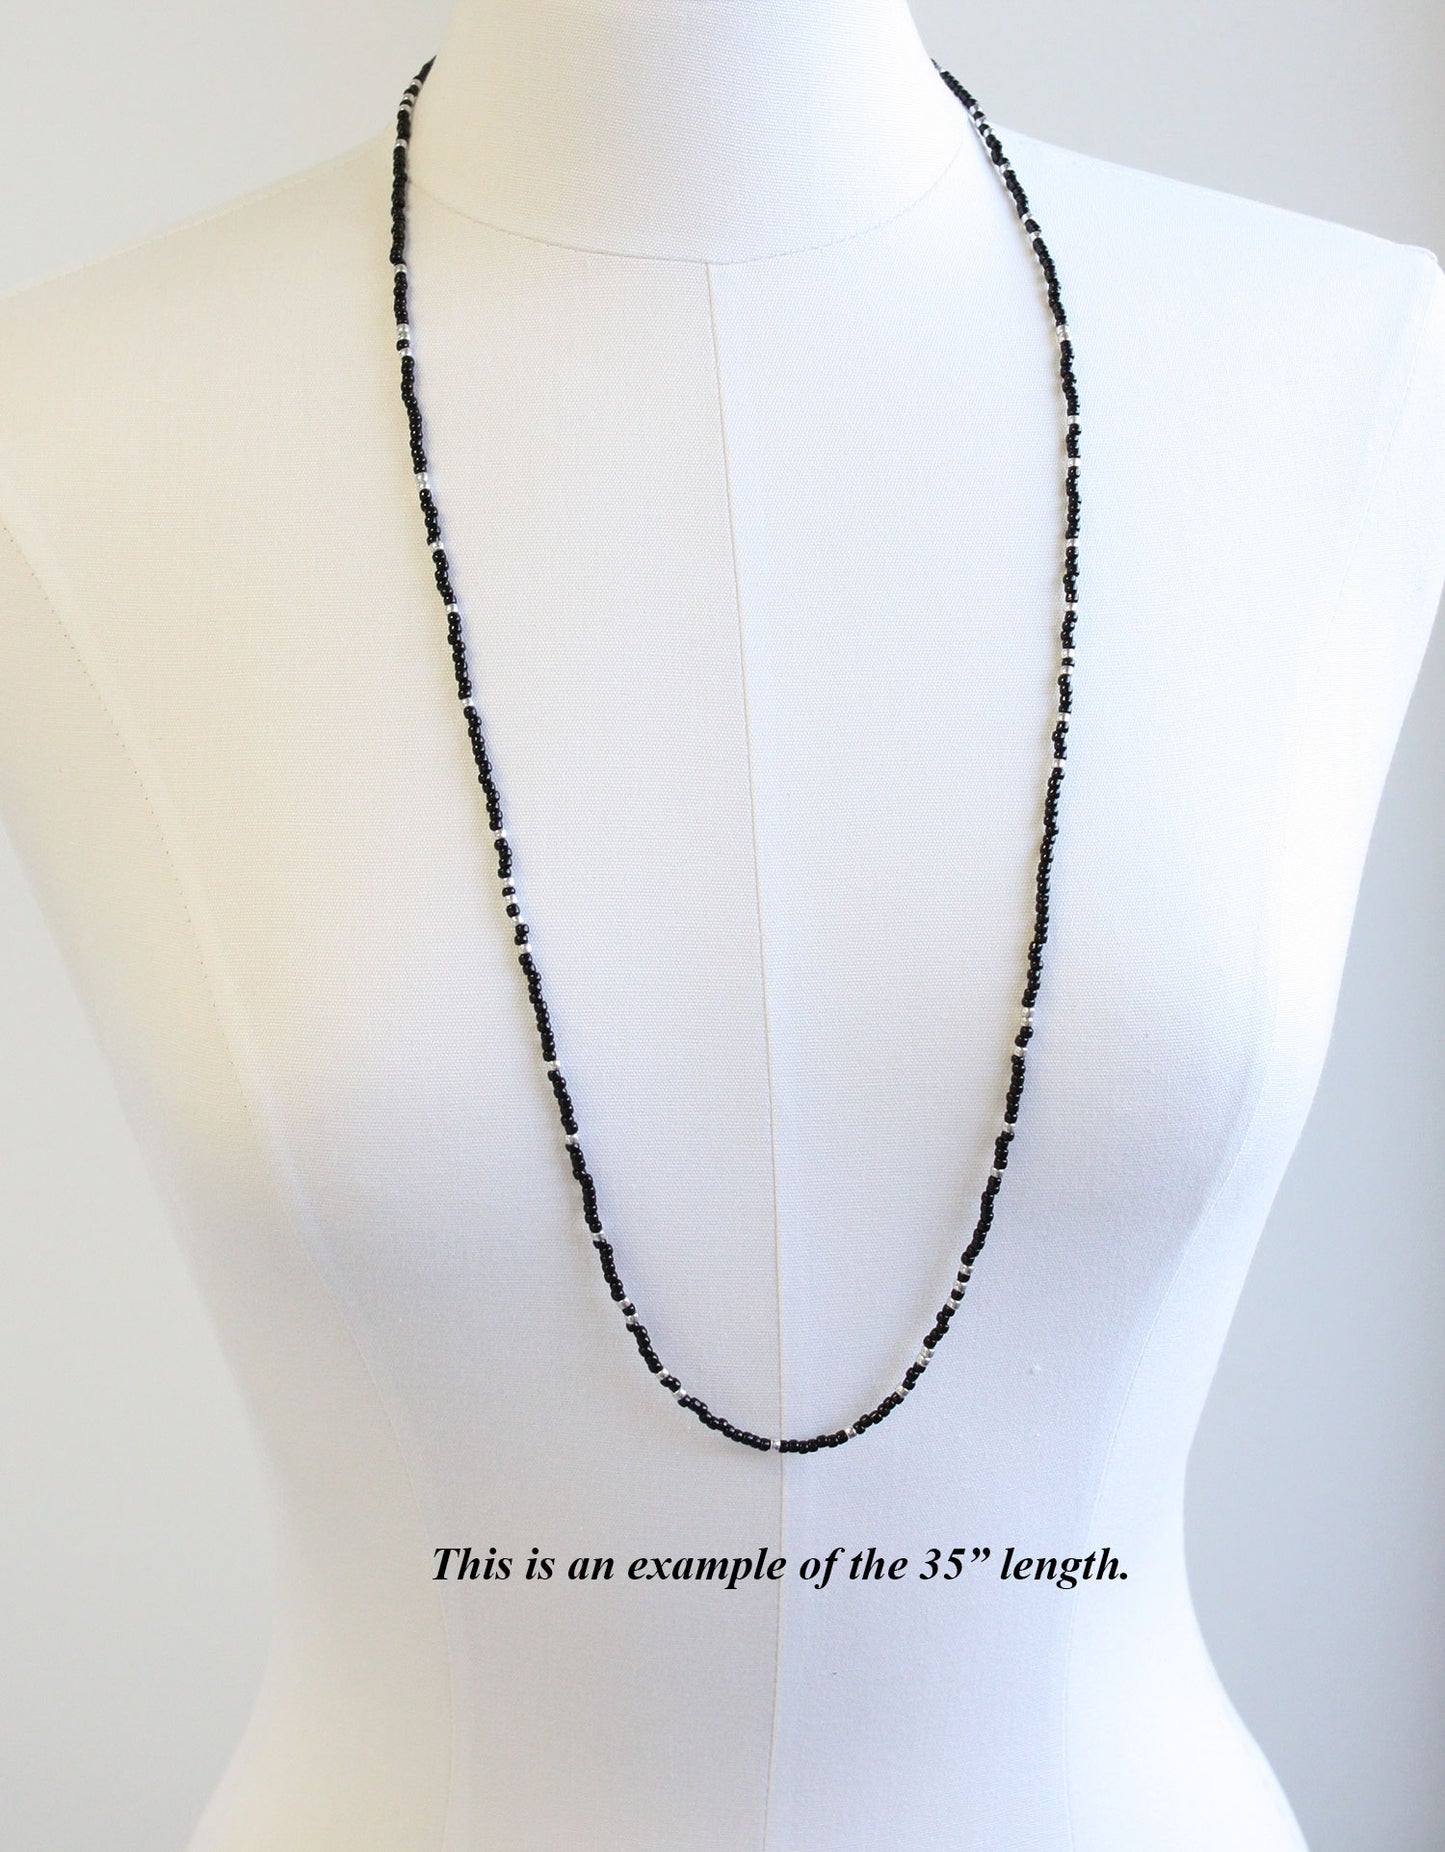 35" Black and Silver Seed Bead Necklace